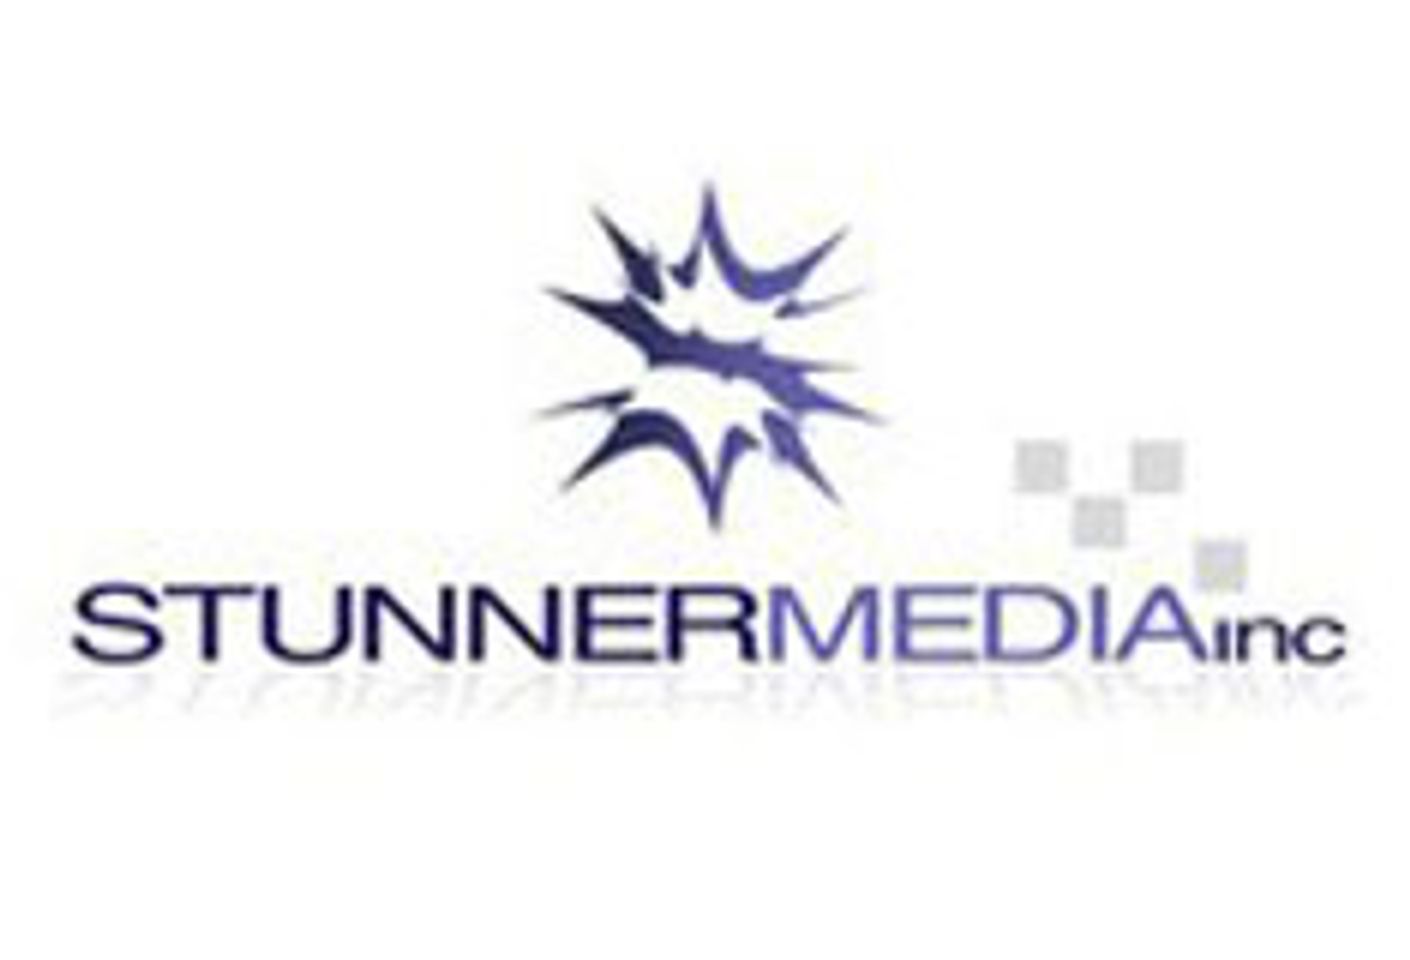 Stunner Media Acquires All Assets from NeoStrata Limited